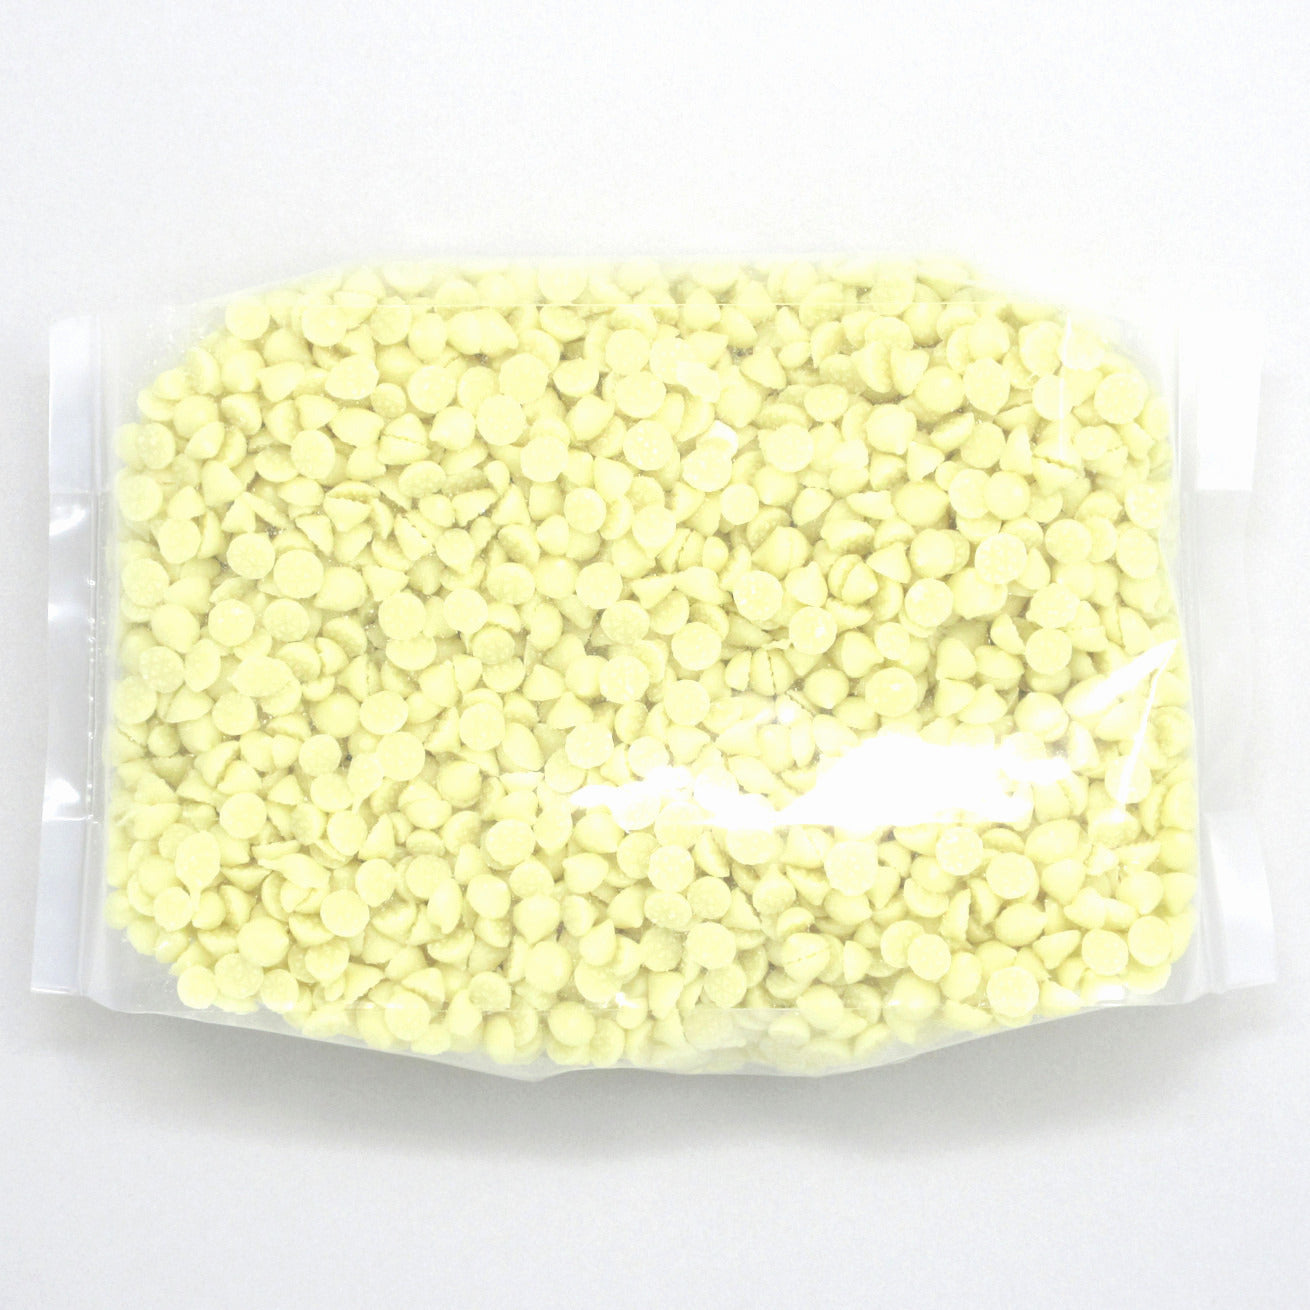 Flour Barrel product image - White Chocolate Chips